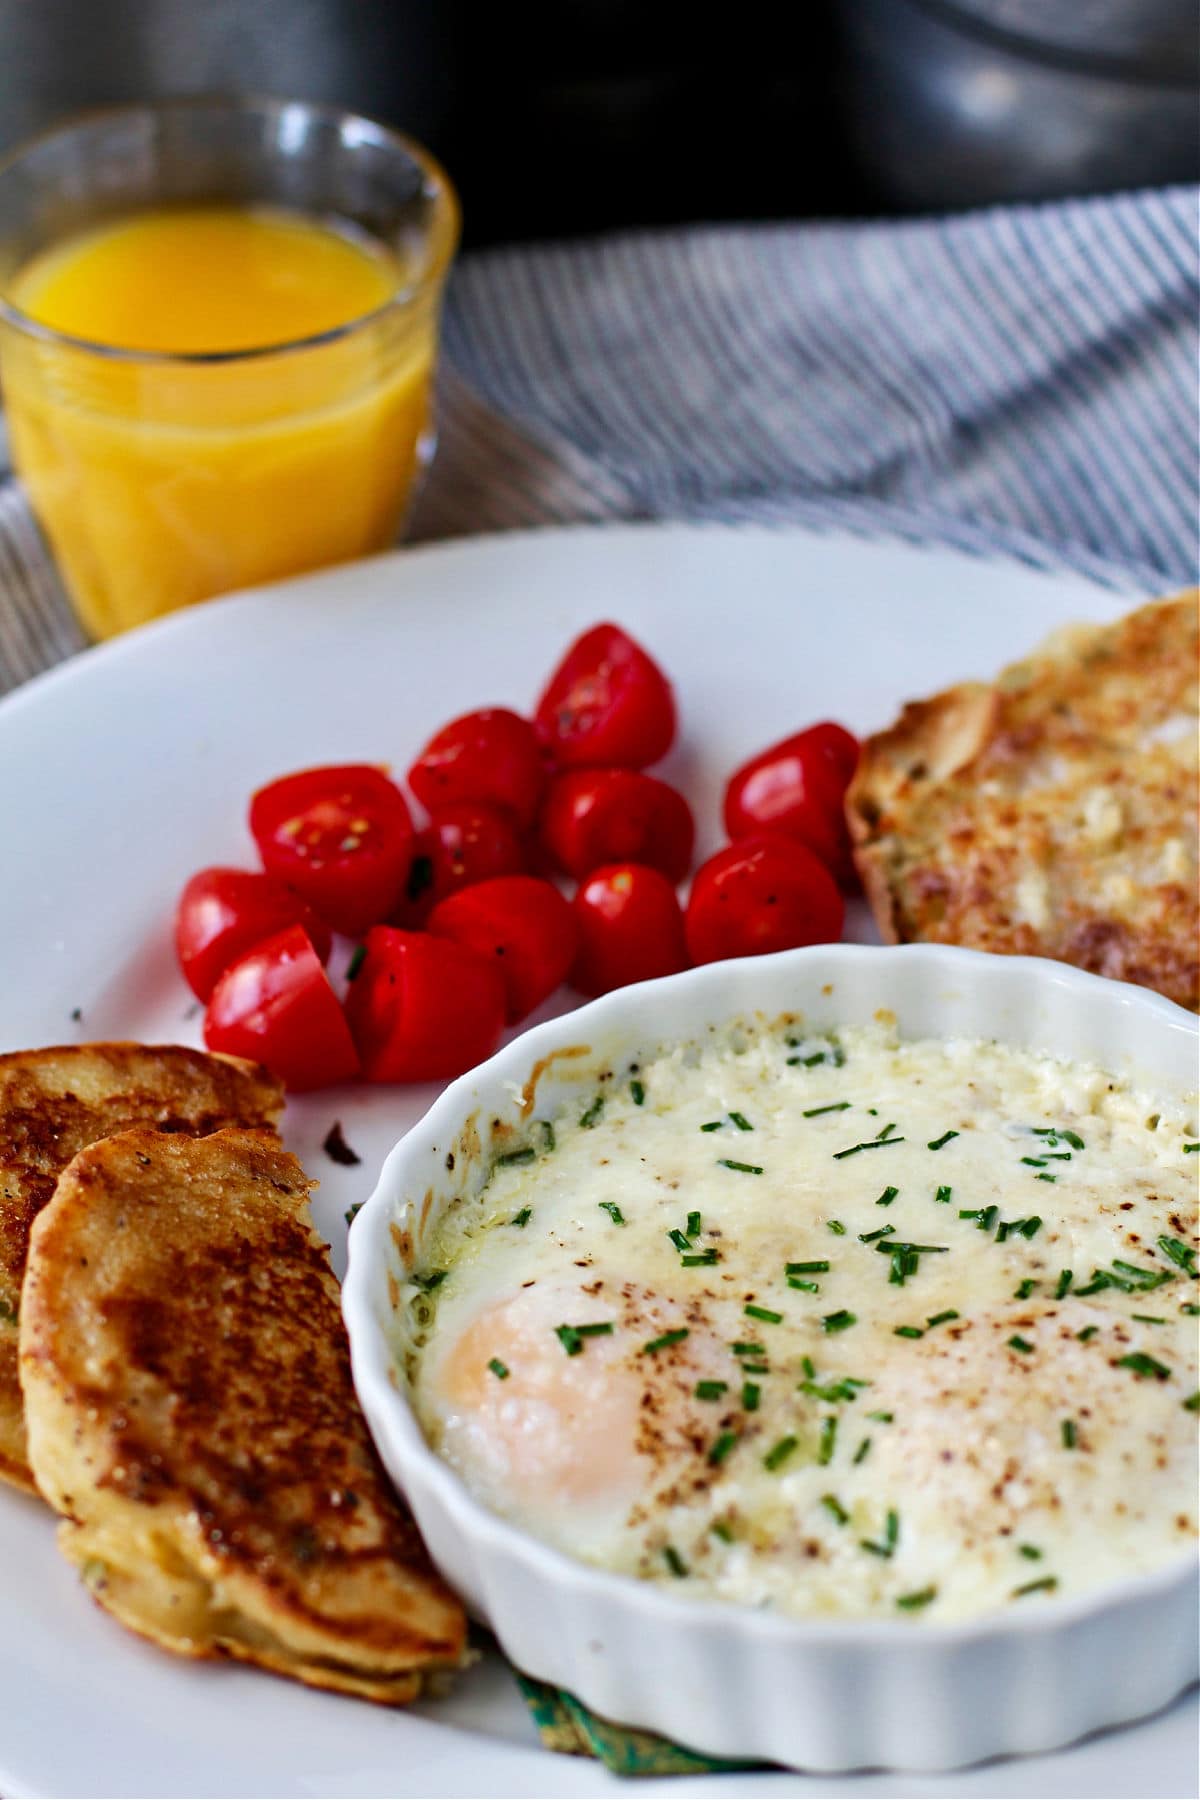 Baked eggs plated with tomatoes.